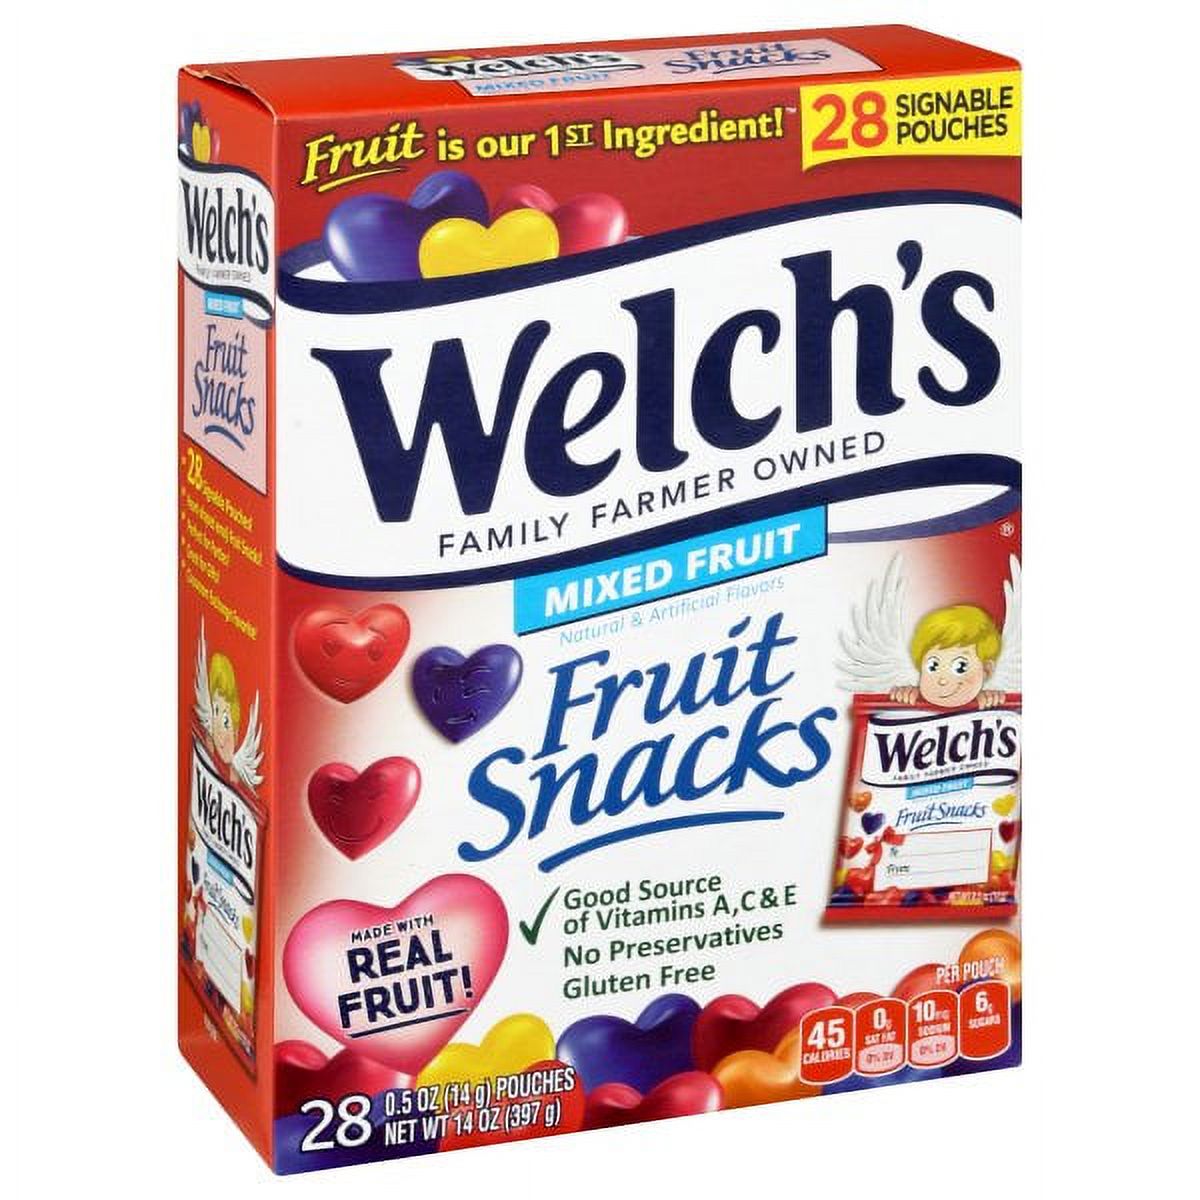 Welch's Fat-Free Mixed Fruit Snacks, 0.5 Oz., 28 Count - image 1 of 4